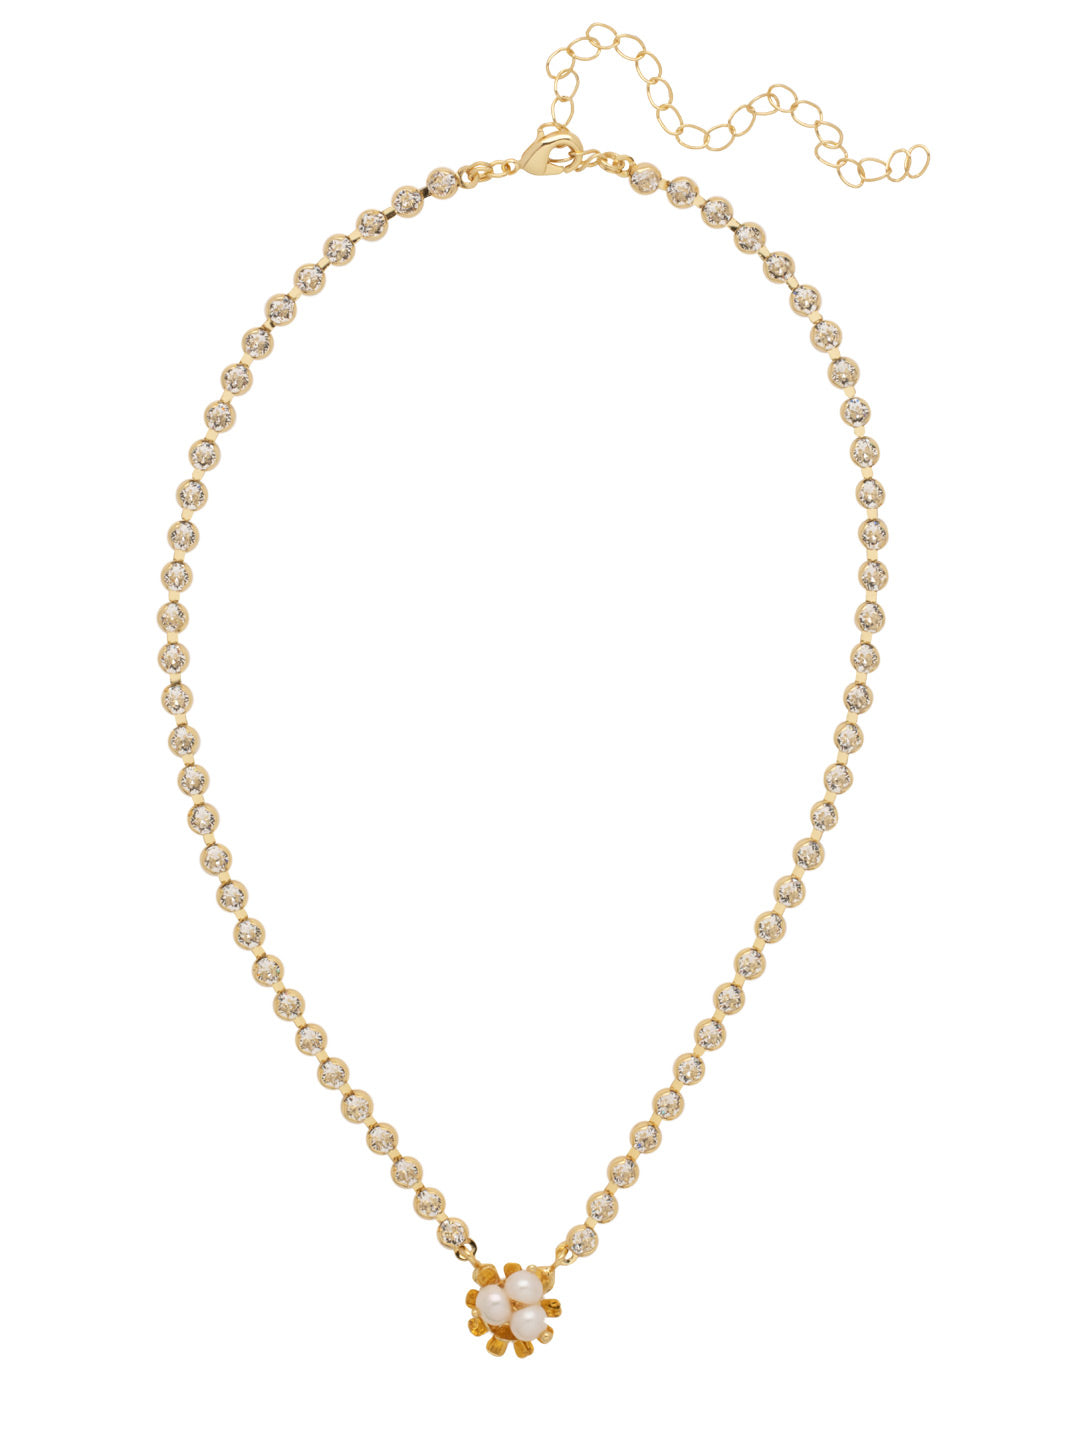 Nesta Rhinestone Chain Pendant Necklace - NFG7BGMDP - <p>The Nesta Rhinestone Chain Pendant Necklace features a nest of freshwater petal pearls on an adjustable rhinestone chain, secured with a lobster claw clasp. From Sorrelli's Modern Pearl collection in our Bright Gold-tone finish.</p>